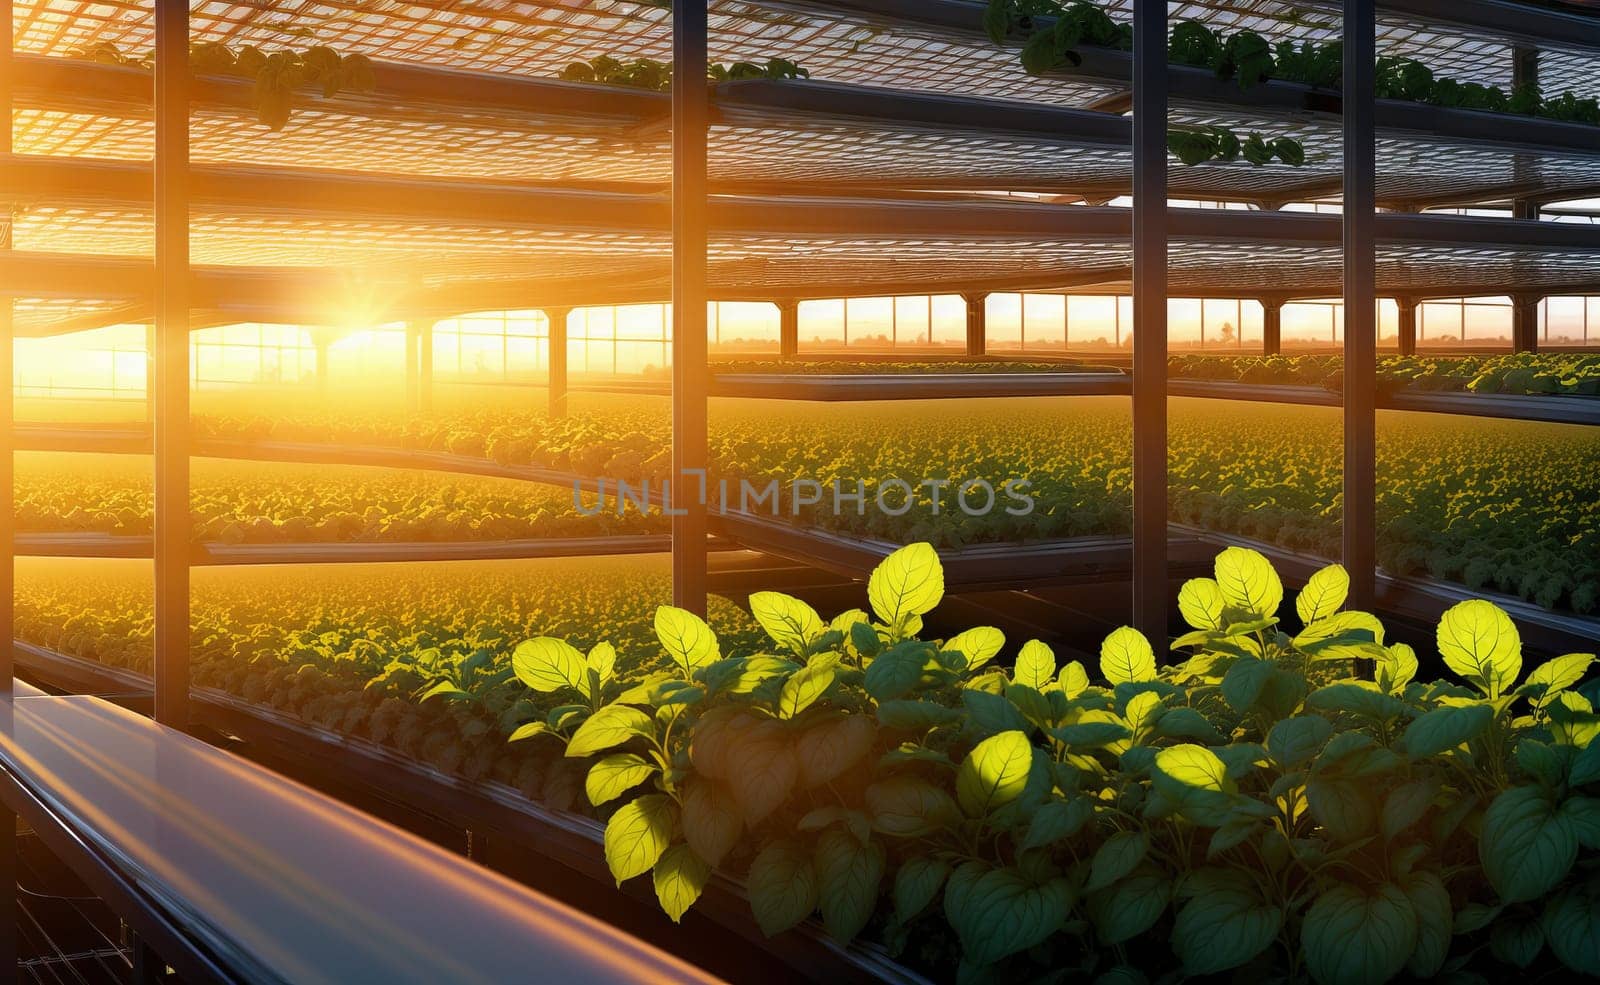 Morning sunlight filters through the greenhouse windows, illuminating the lush plants and colorful flowers, creating a beautiful landscape of tints and shades